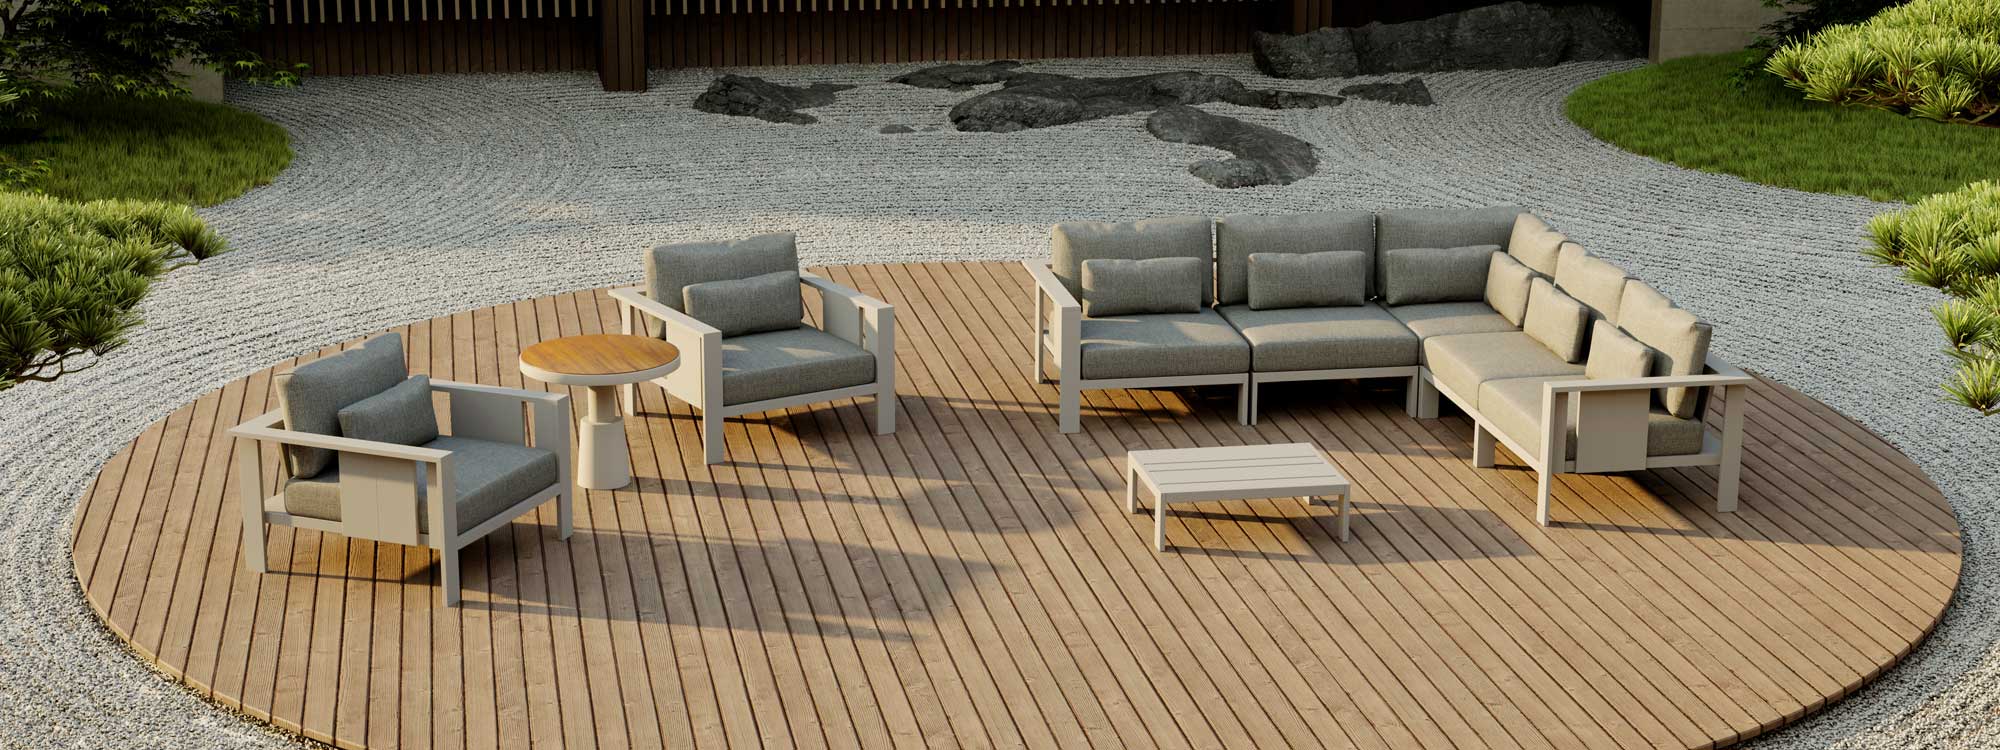 Image of Oiside Beam aluminium corner sofa and lounge chairs on circular wooden deck, surrounded by Japanese garden